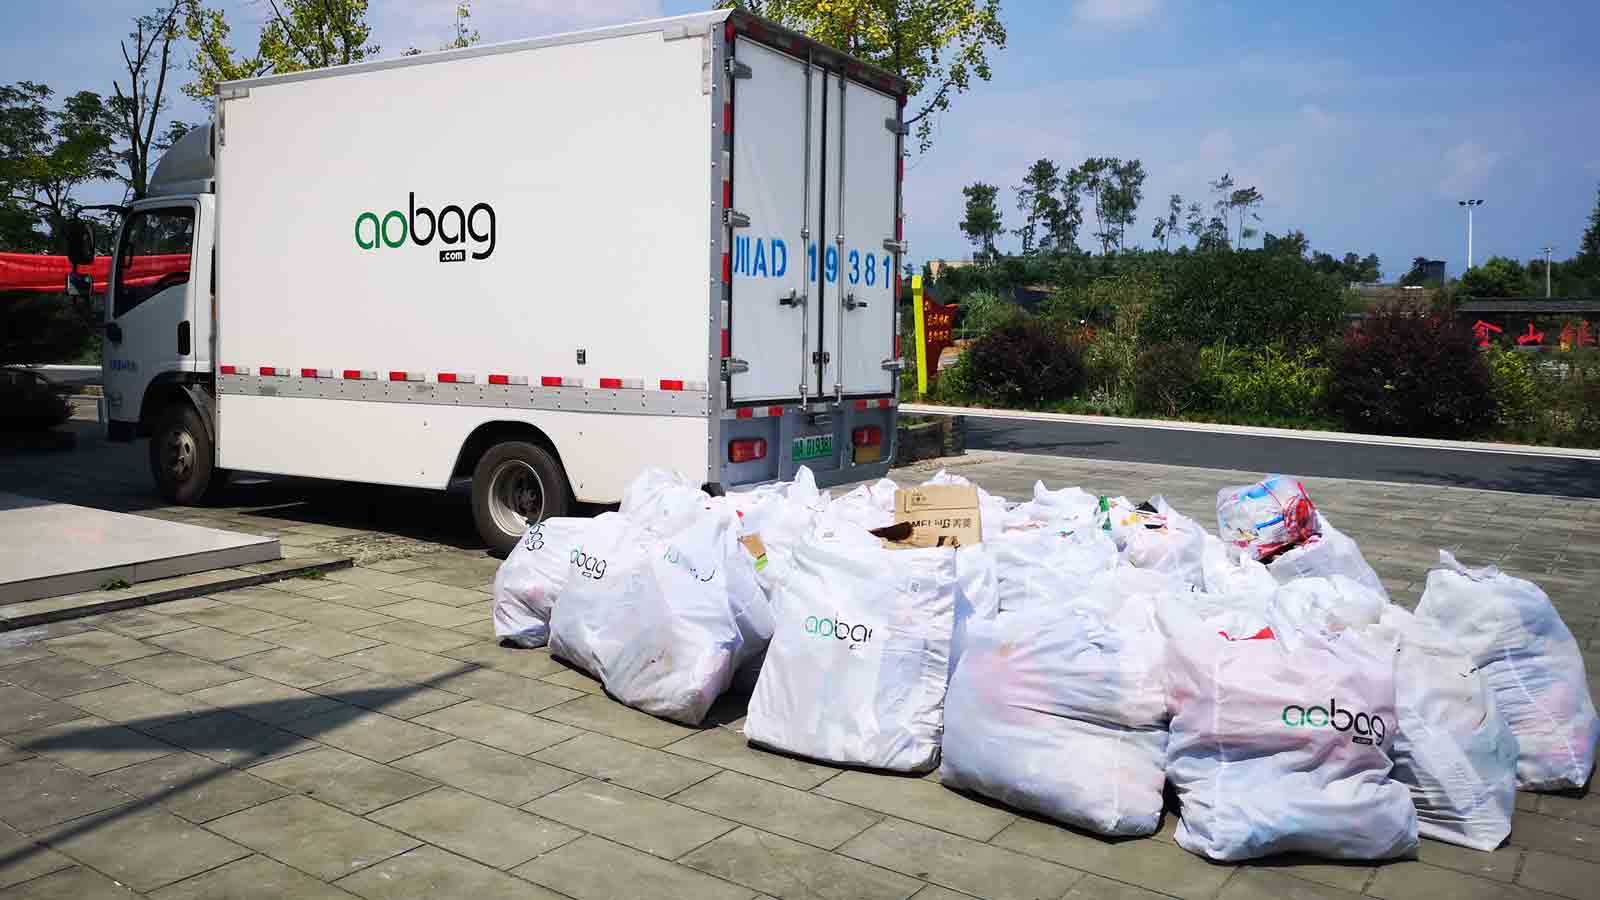 Truck with AOBag